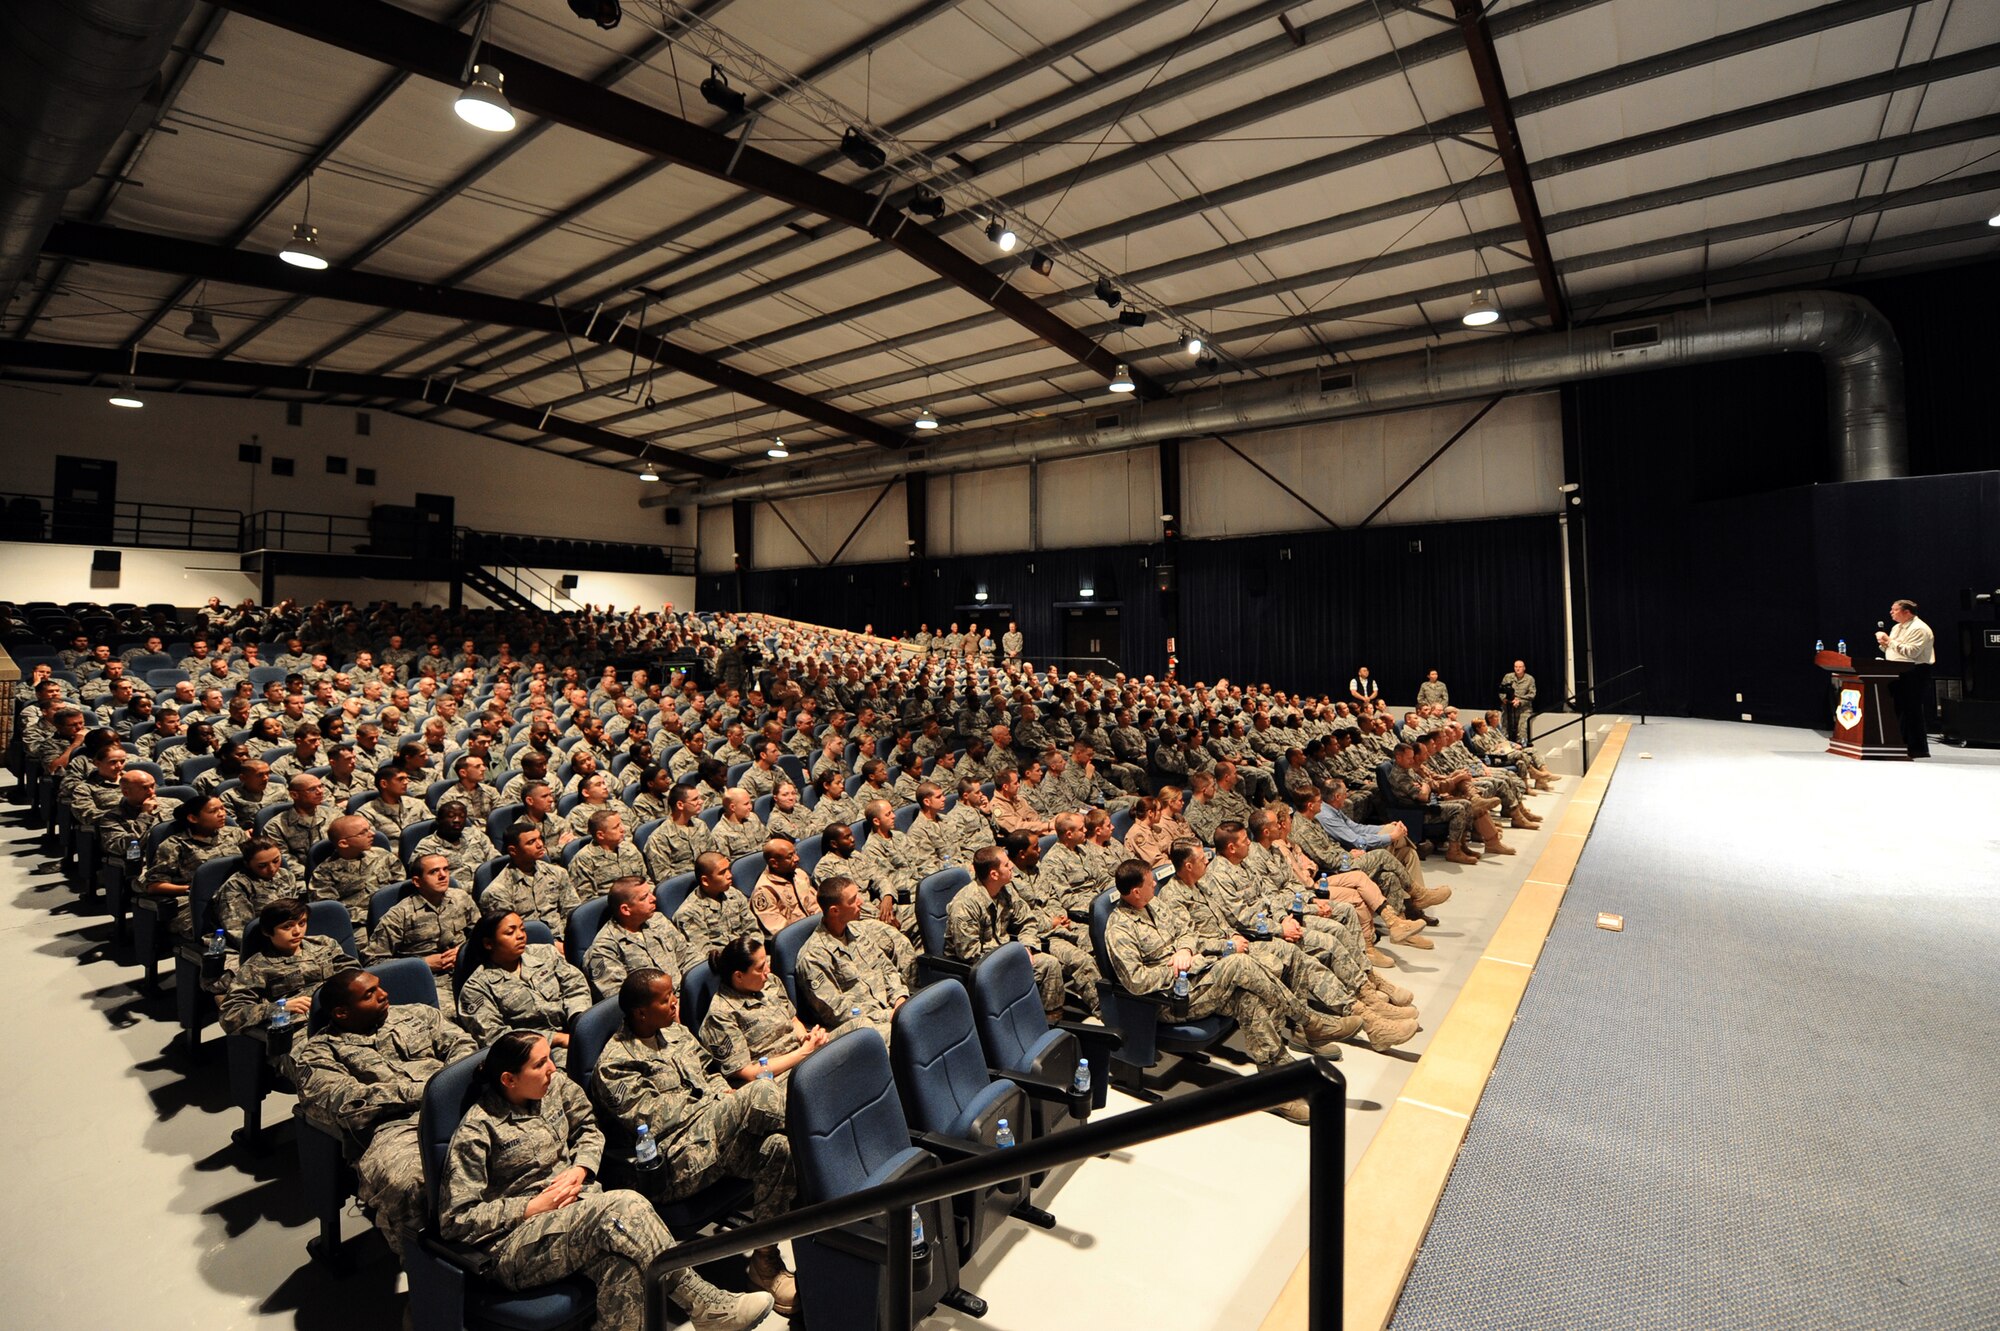 Secretary of the Air Force Michael Donley speaks to 379th Air Expeditionary Wing Airmen at the base theater during his visit Jan. 29, 2010, to a deployed location in Southwest Asia. (U.S. Air Force photo/Senior Airman Kasey Zickmund)